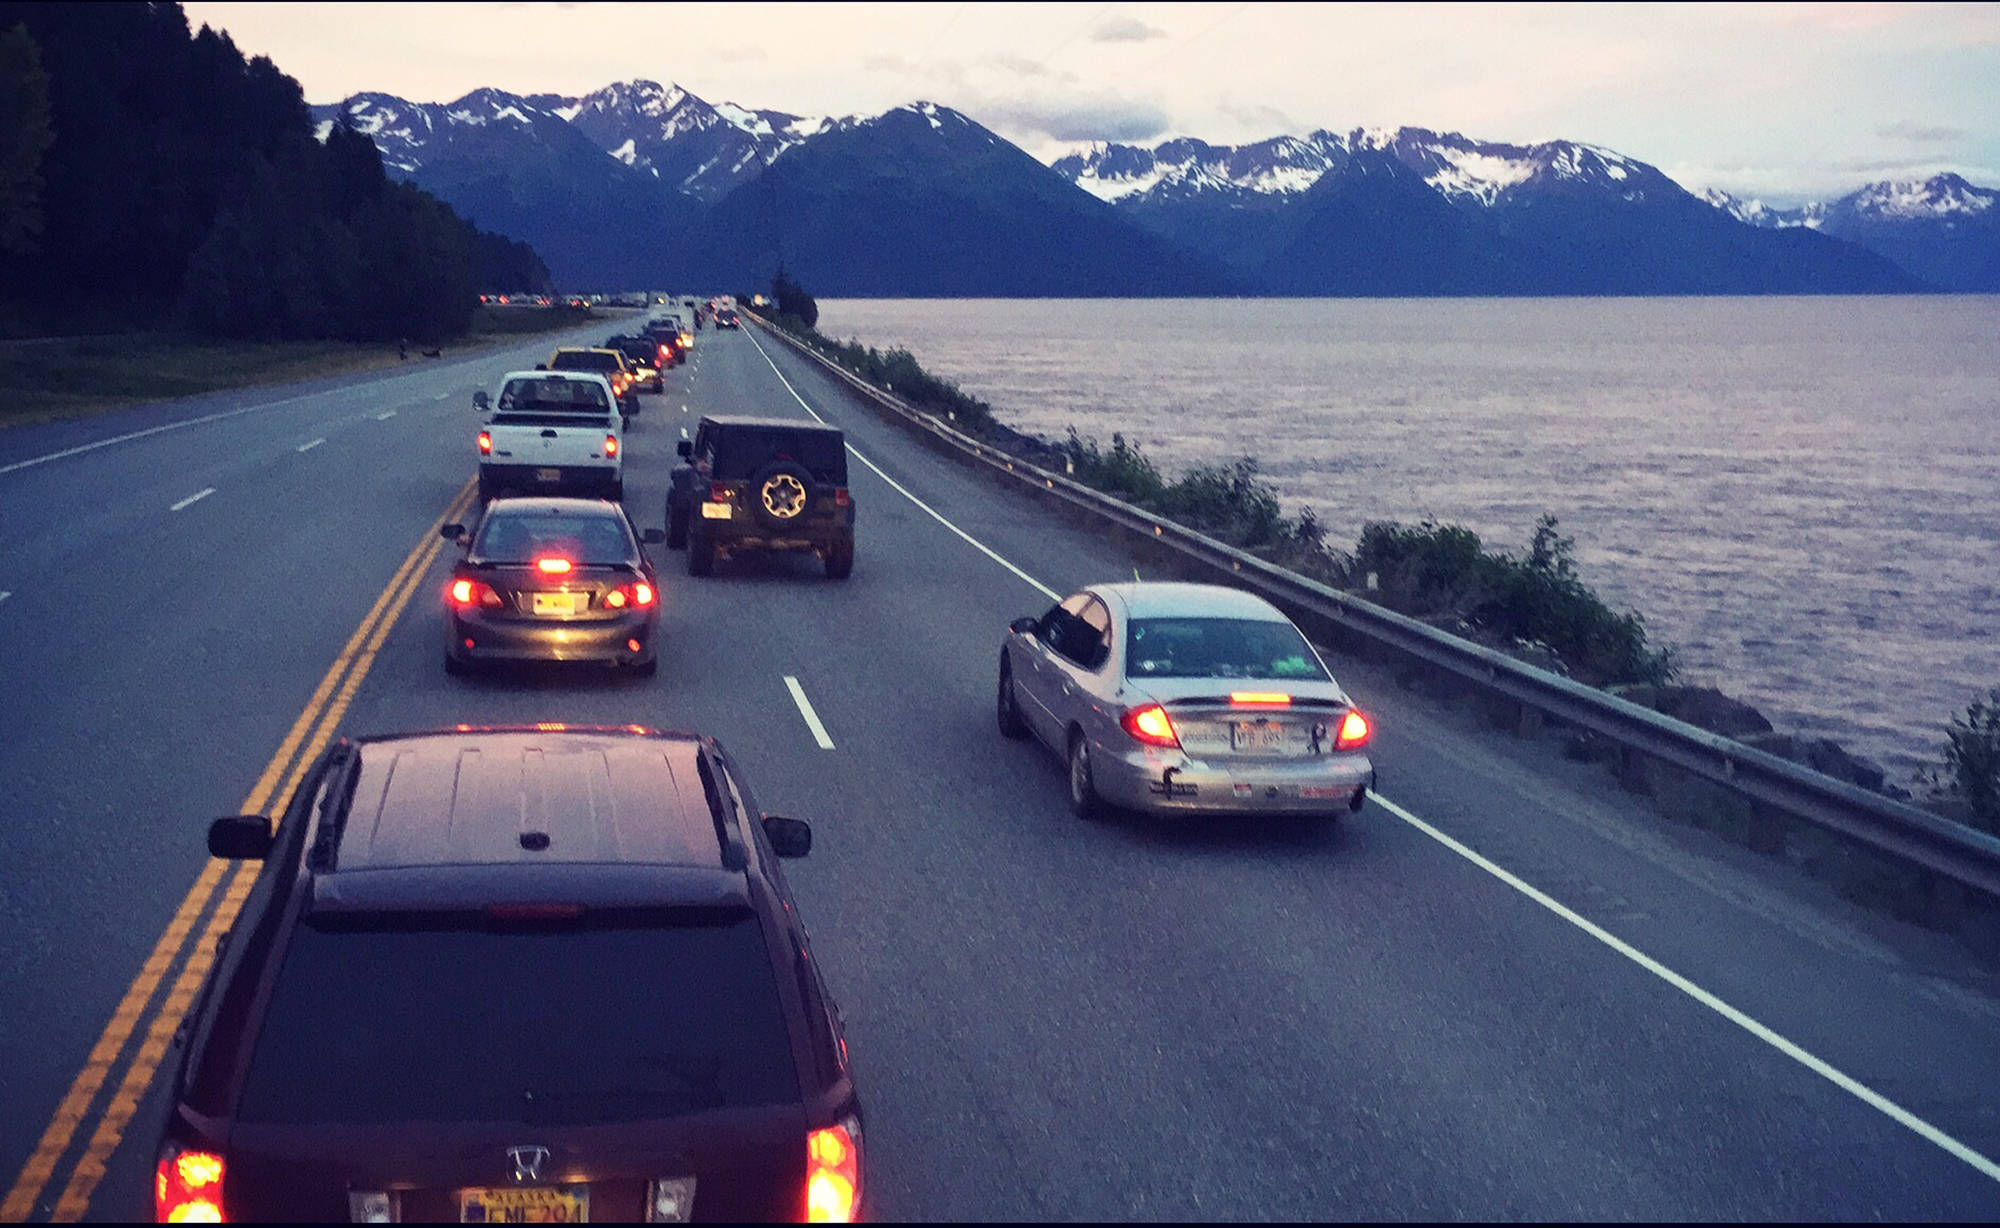 This photo taken July 3, 2015 shows cars lined up on the Seward Highway along the Turnagain Arm in after a fatal accident in which a trooper vehicle struck and killed a motorcyclist it was pursuing closed the highway for several hours. Troopers have reduced their coverage of a stretch from about mile 75 of that highway to south of McHugh Creek due to budget cuts. (Ben Boettger/Peninsula Clarion)